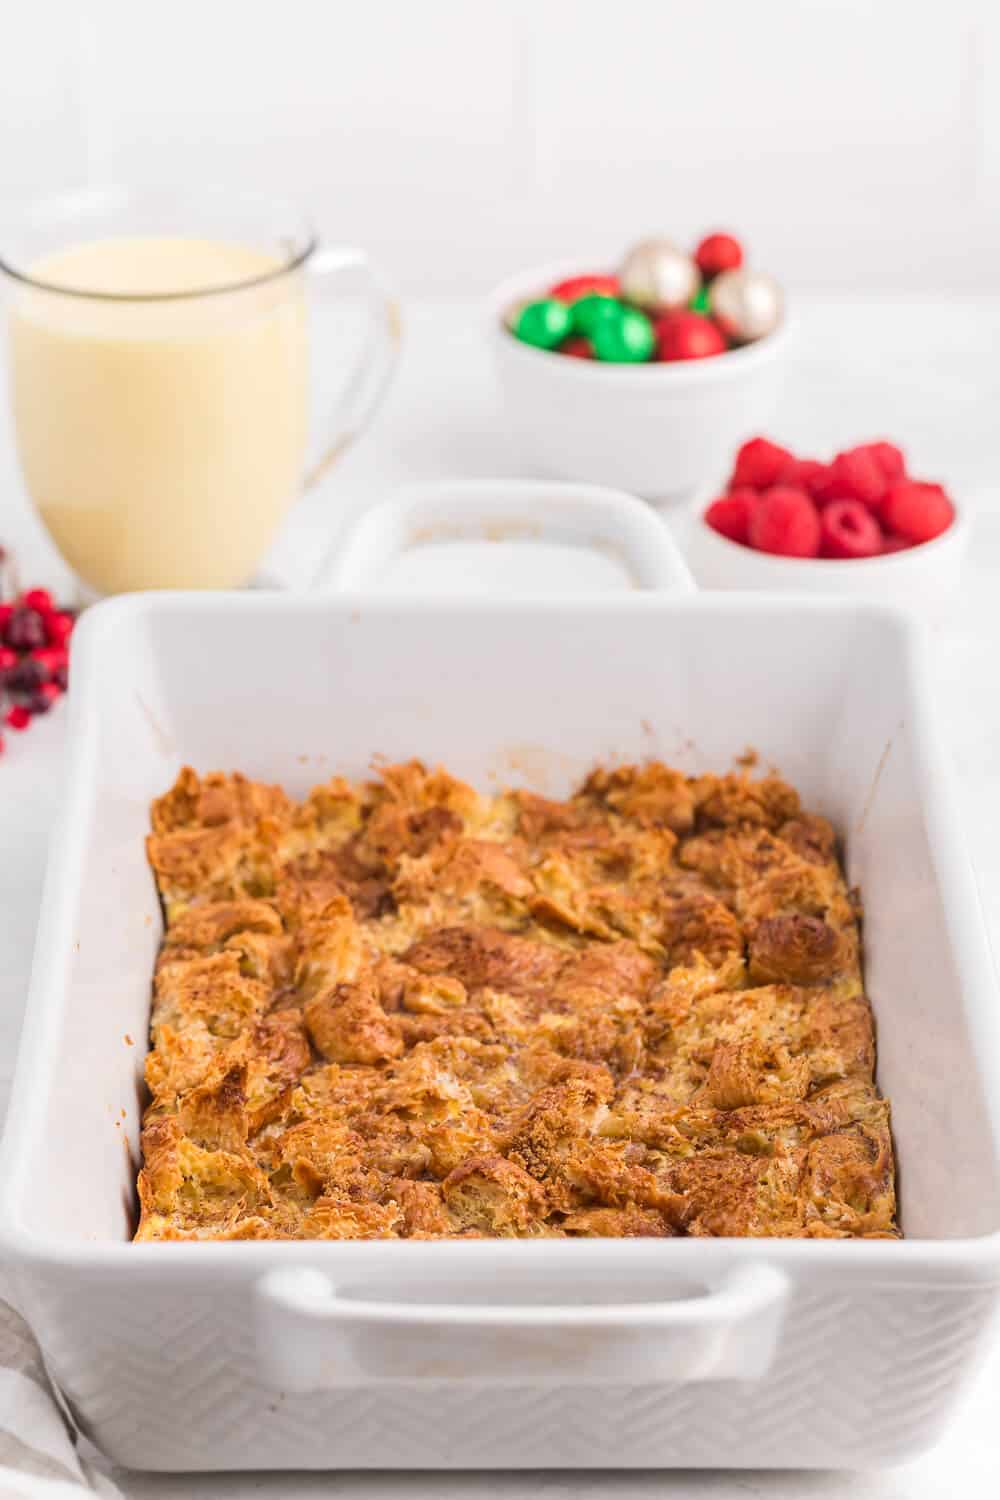 Eggnog Breakfast Casserole - Nothing says "holidays" like eggnog! This breakfast casserole is made extra special with a croissant base, a sprinkling of sweet brown sugar, cinnamon and nutmeg.